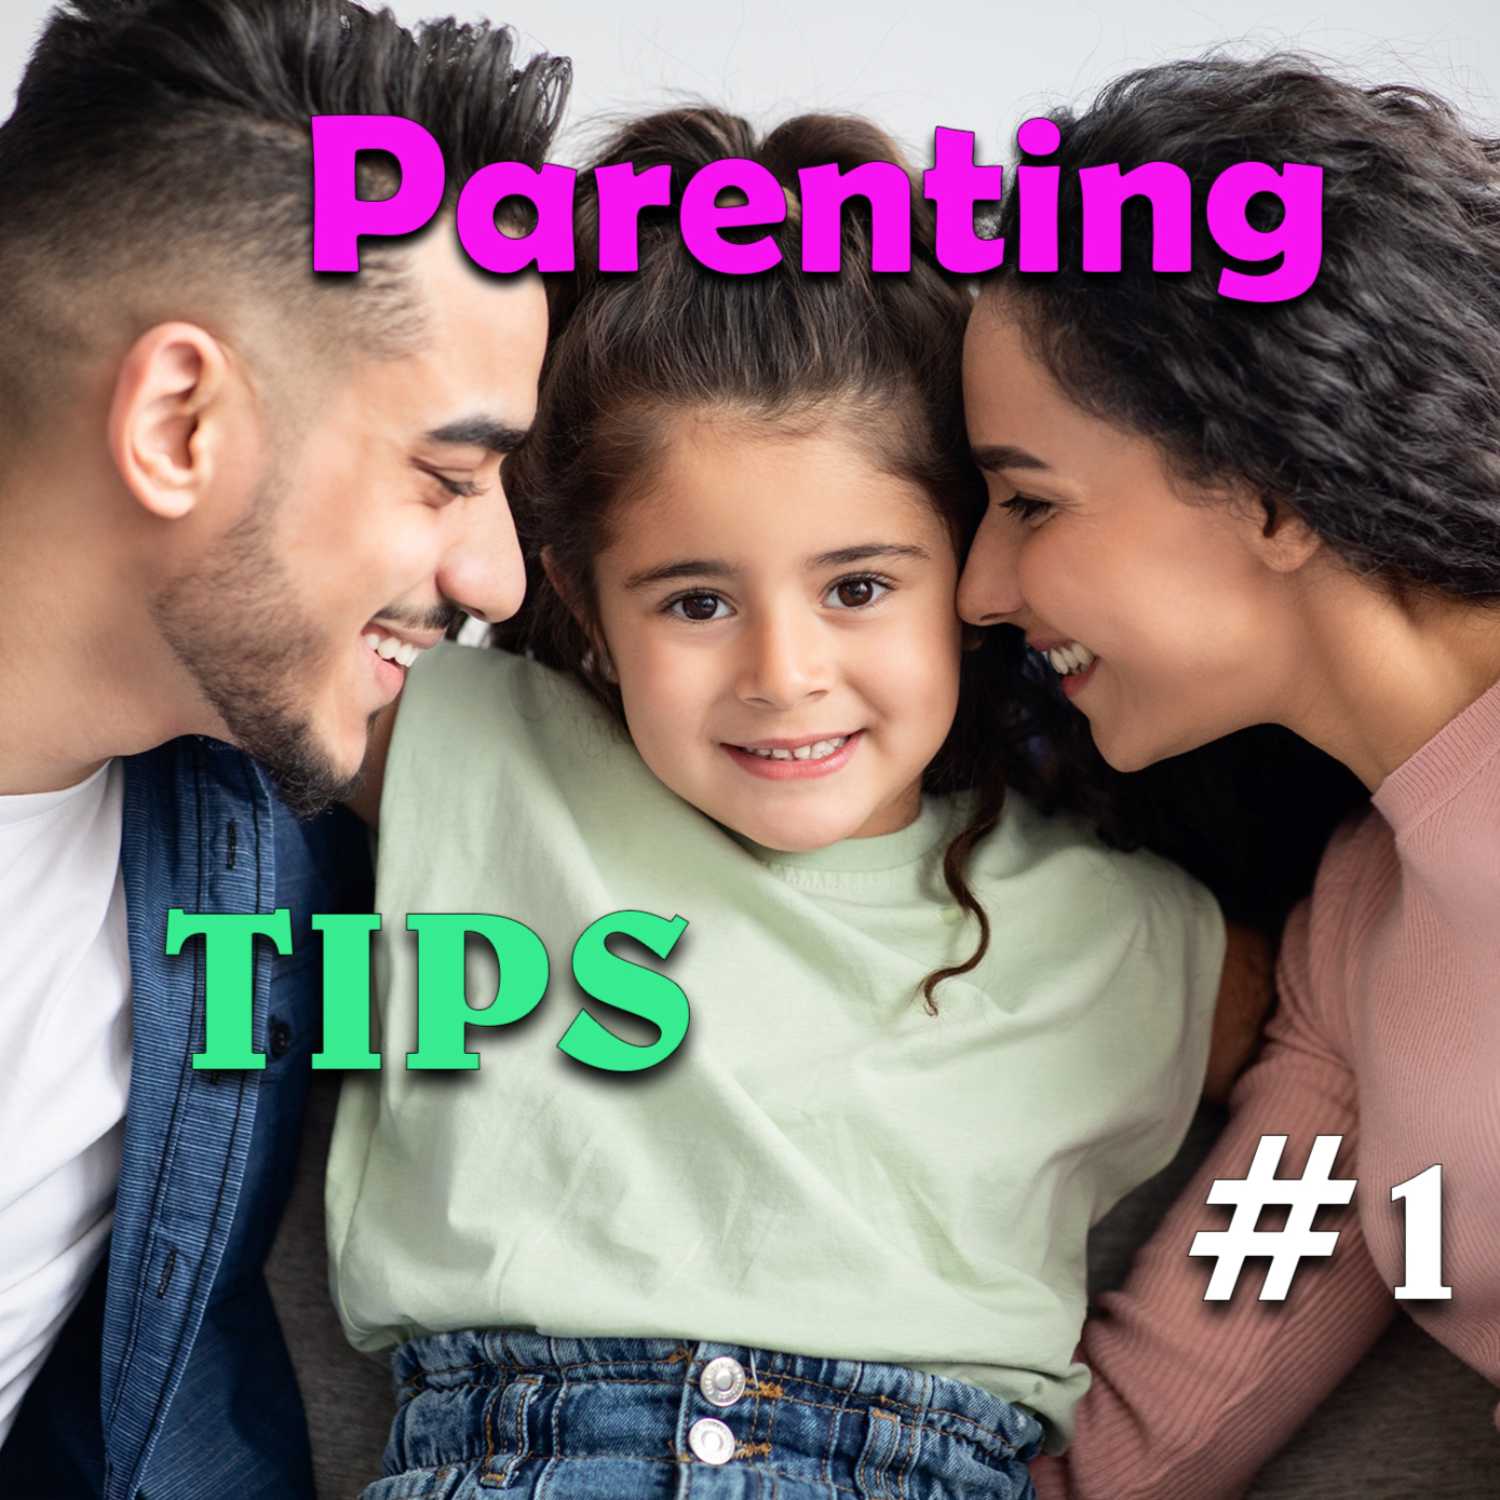 How To Be A Good Parent - Parenting Tips series